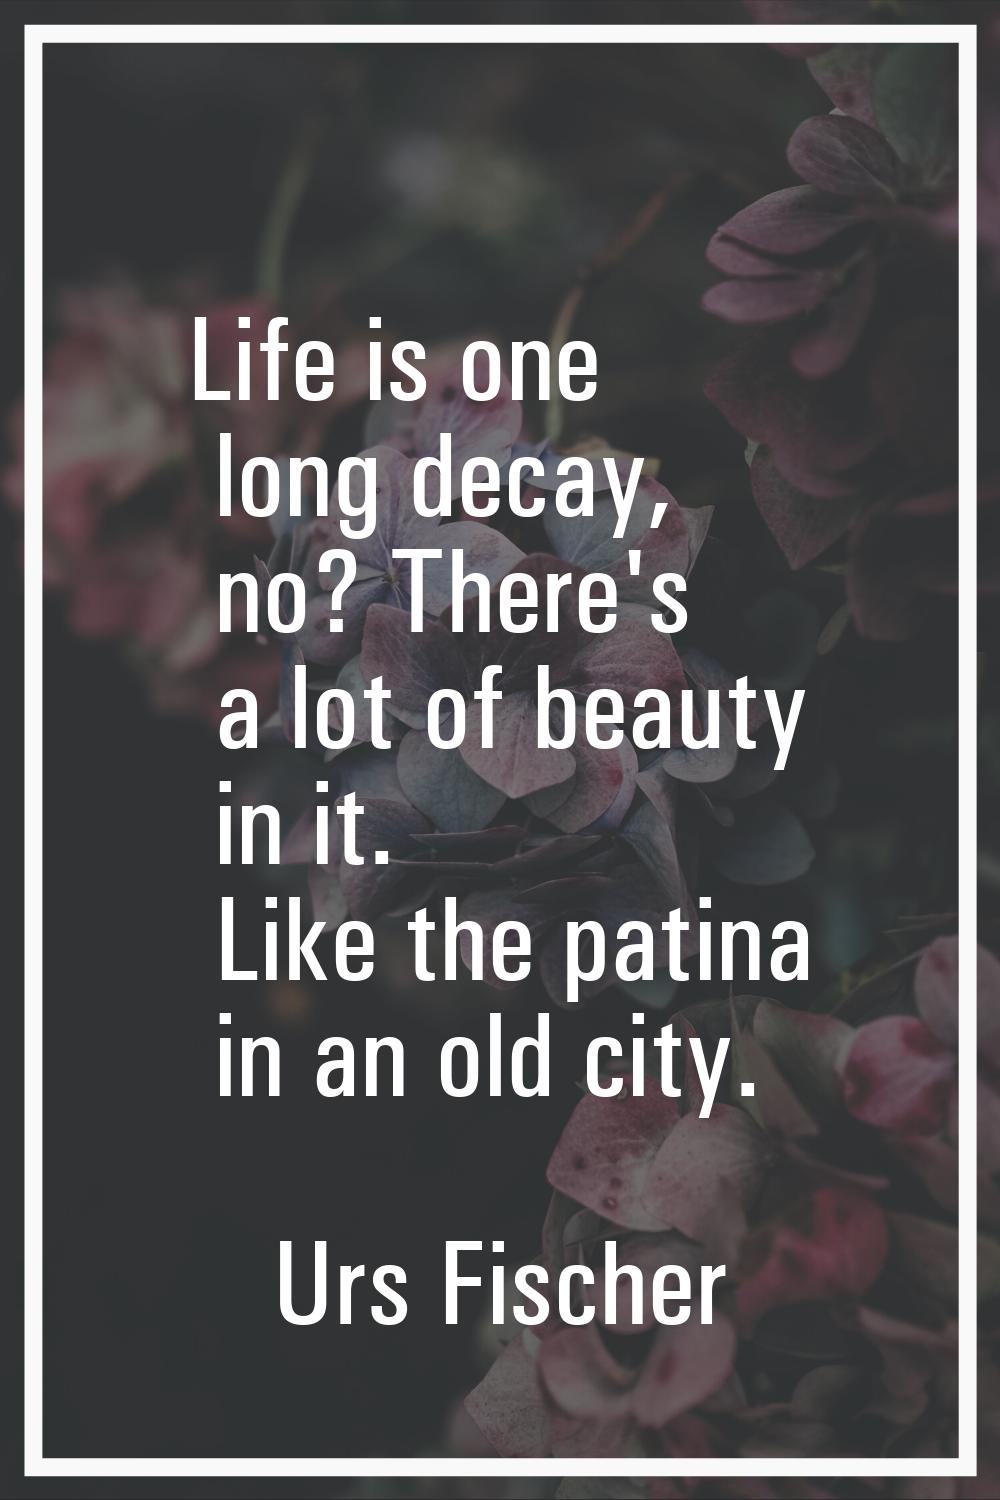 Life is one long decay, no? There's a lot of beauty in it. Like the patina in an old city.